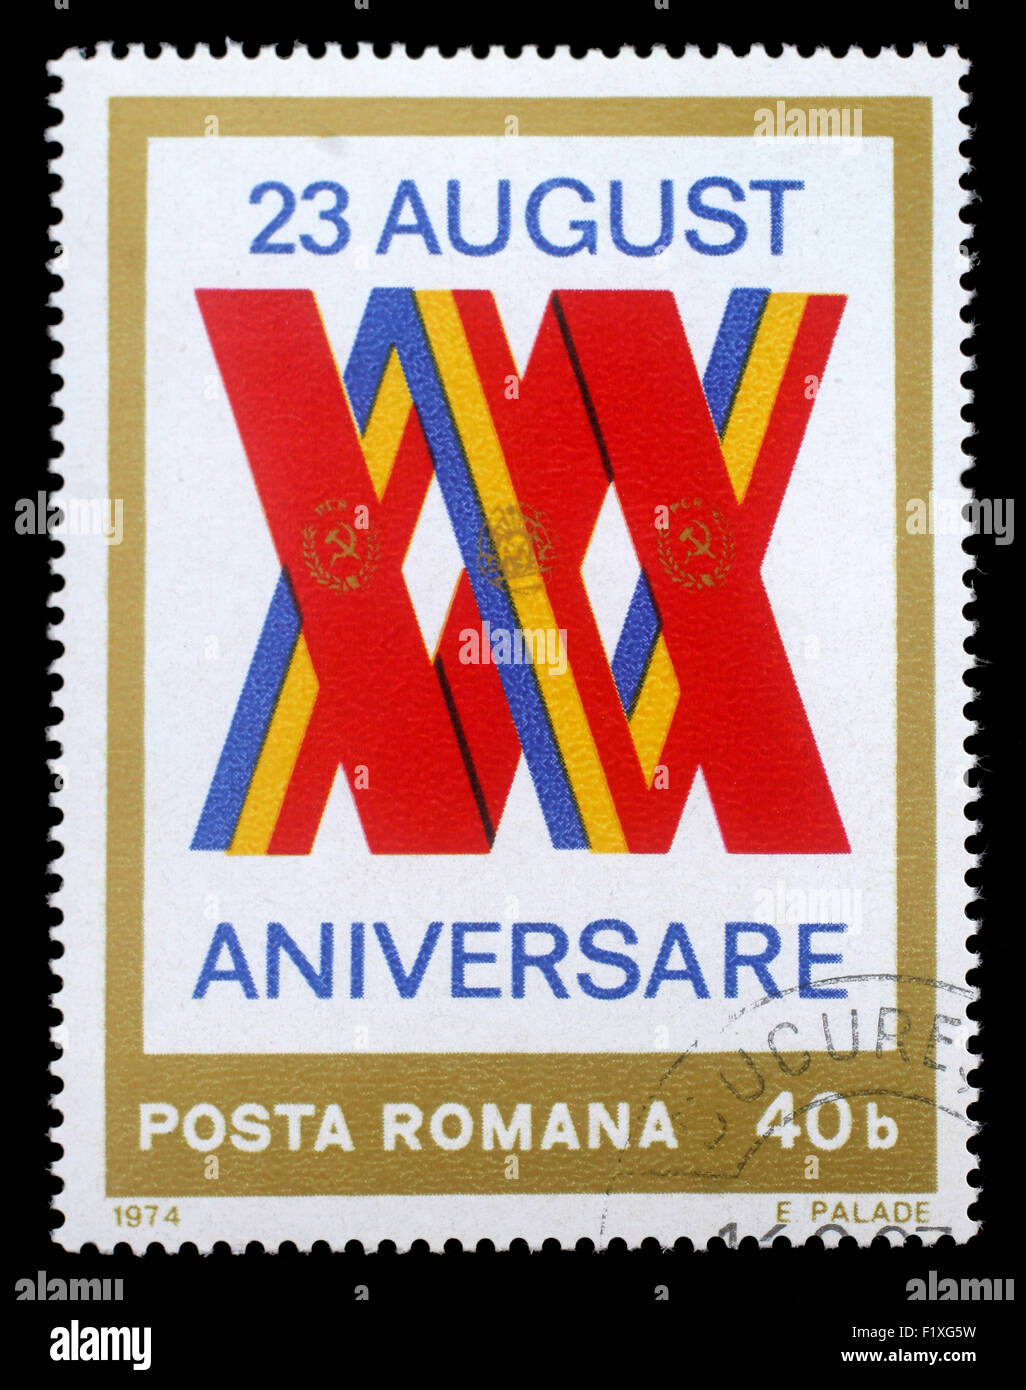 Stamp printed by Romania, shows emblem and flags, circa 1974 Stock Photo